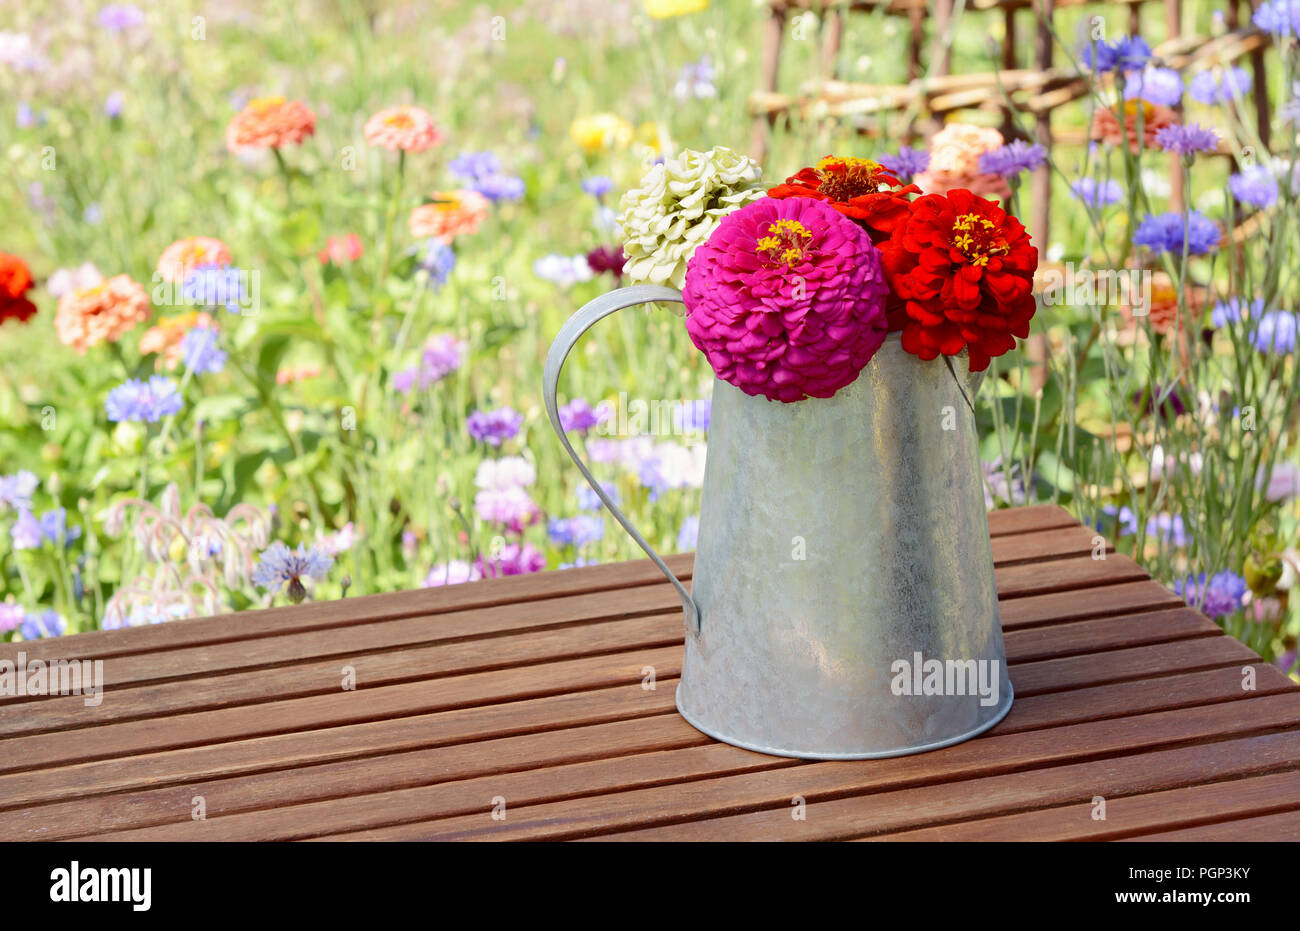 Pink and red zinnias arranged in a rustic metal pitcher, standing on a wooden table with blooming flowers beyond Stock Photo